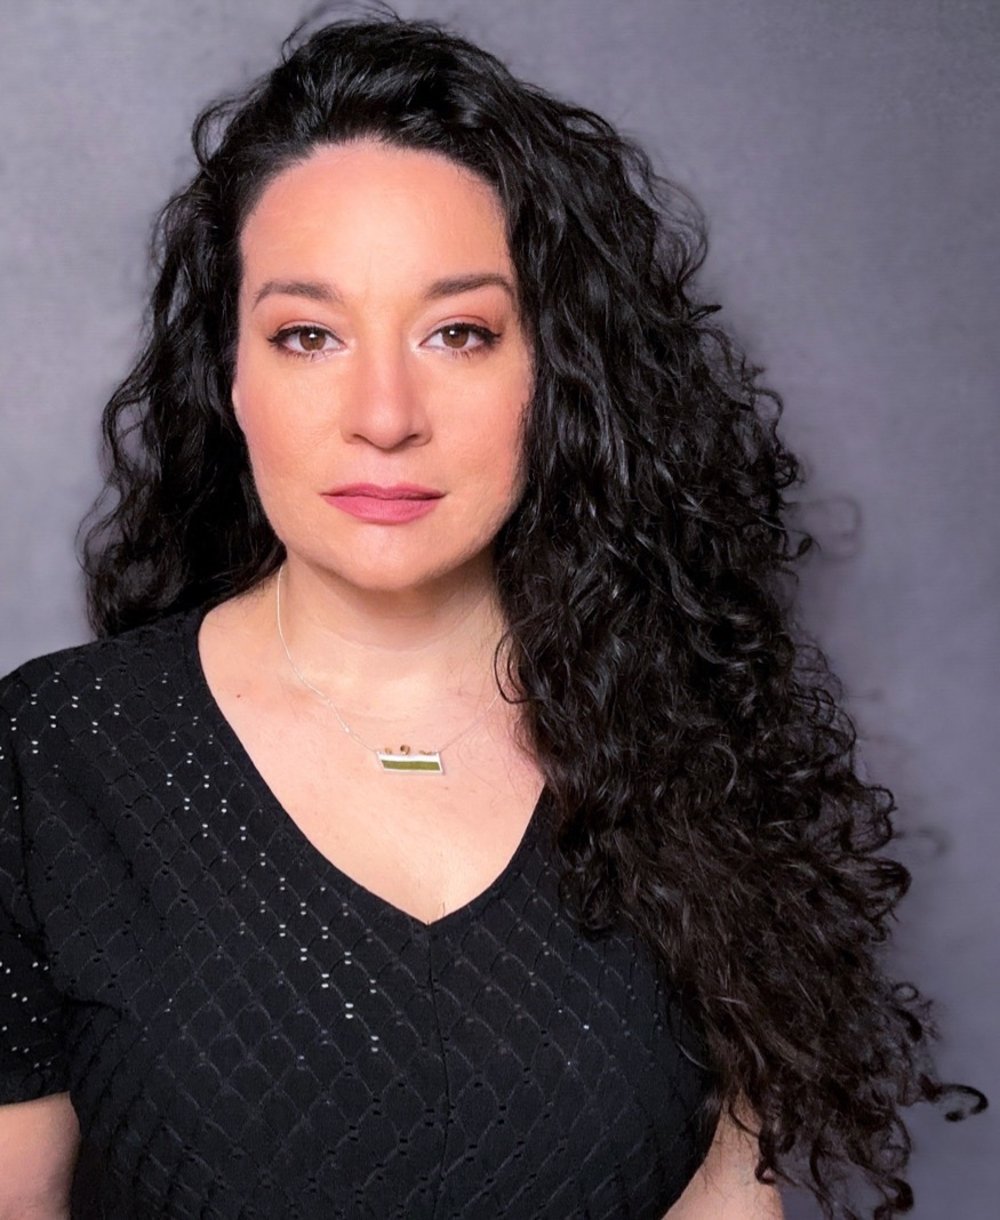 a woman with dark curly hair wearing a black shirt looks at the camera